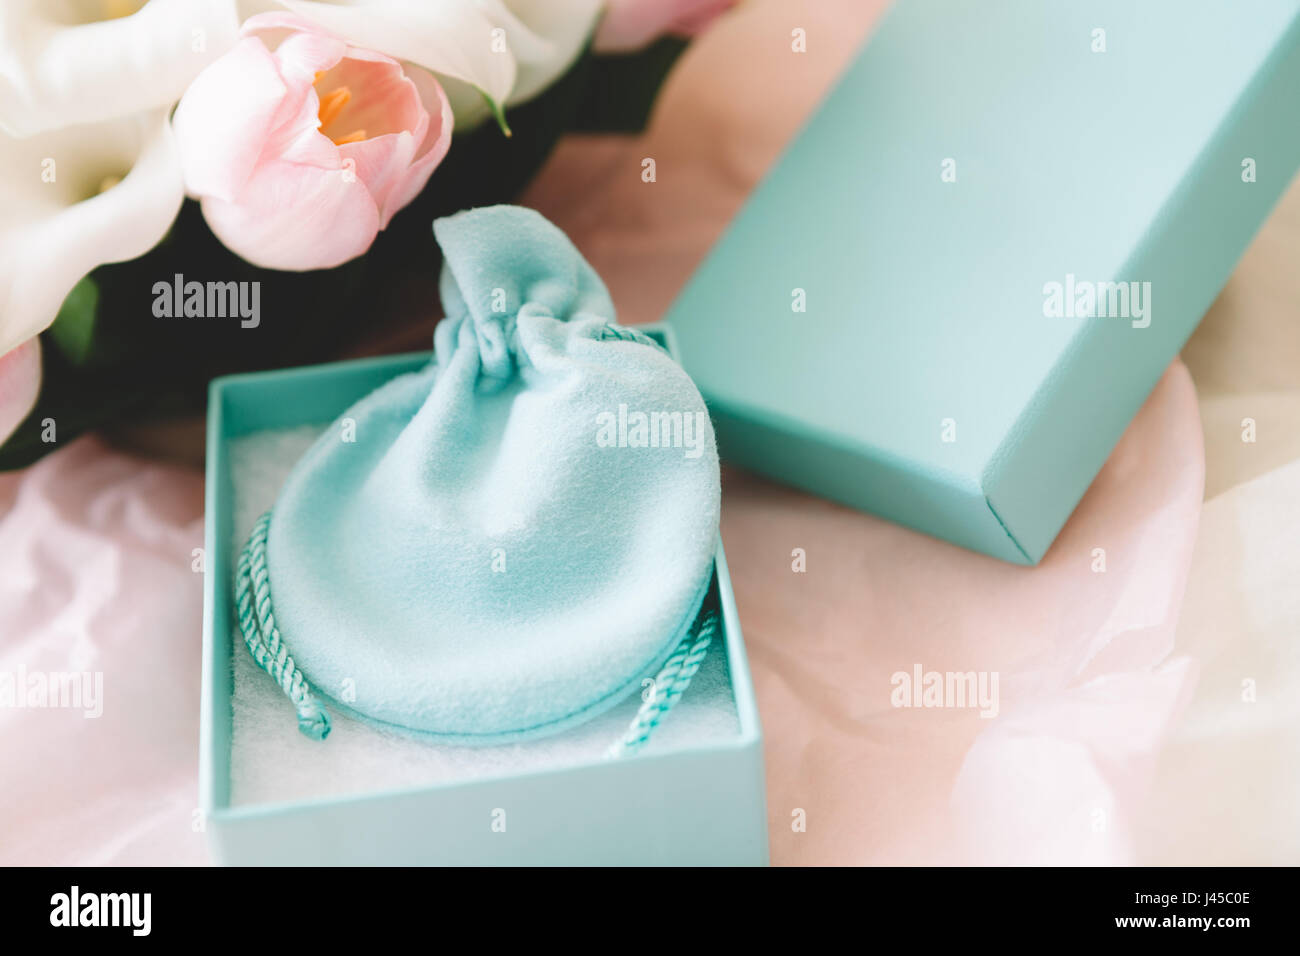 Pale blue jewellery box and bag Stock Photo